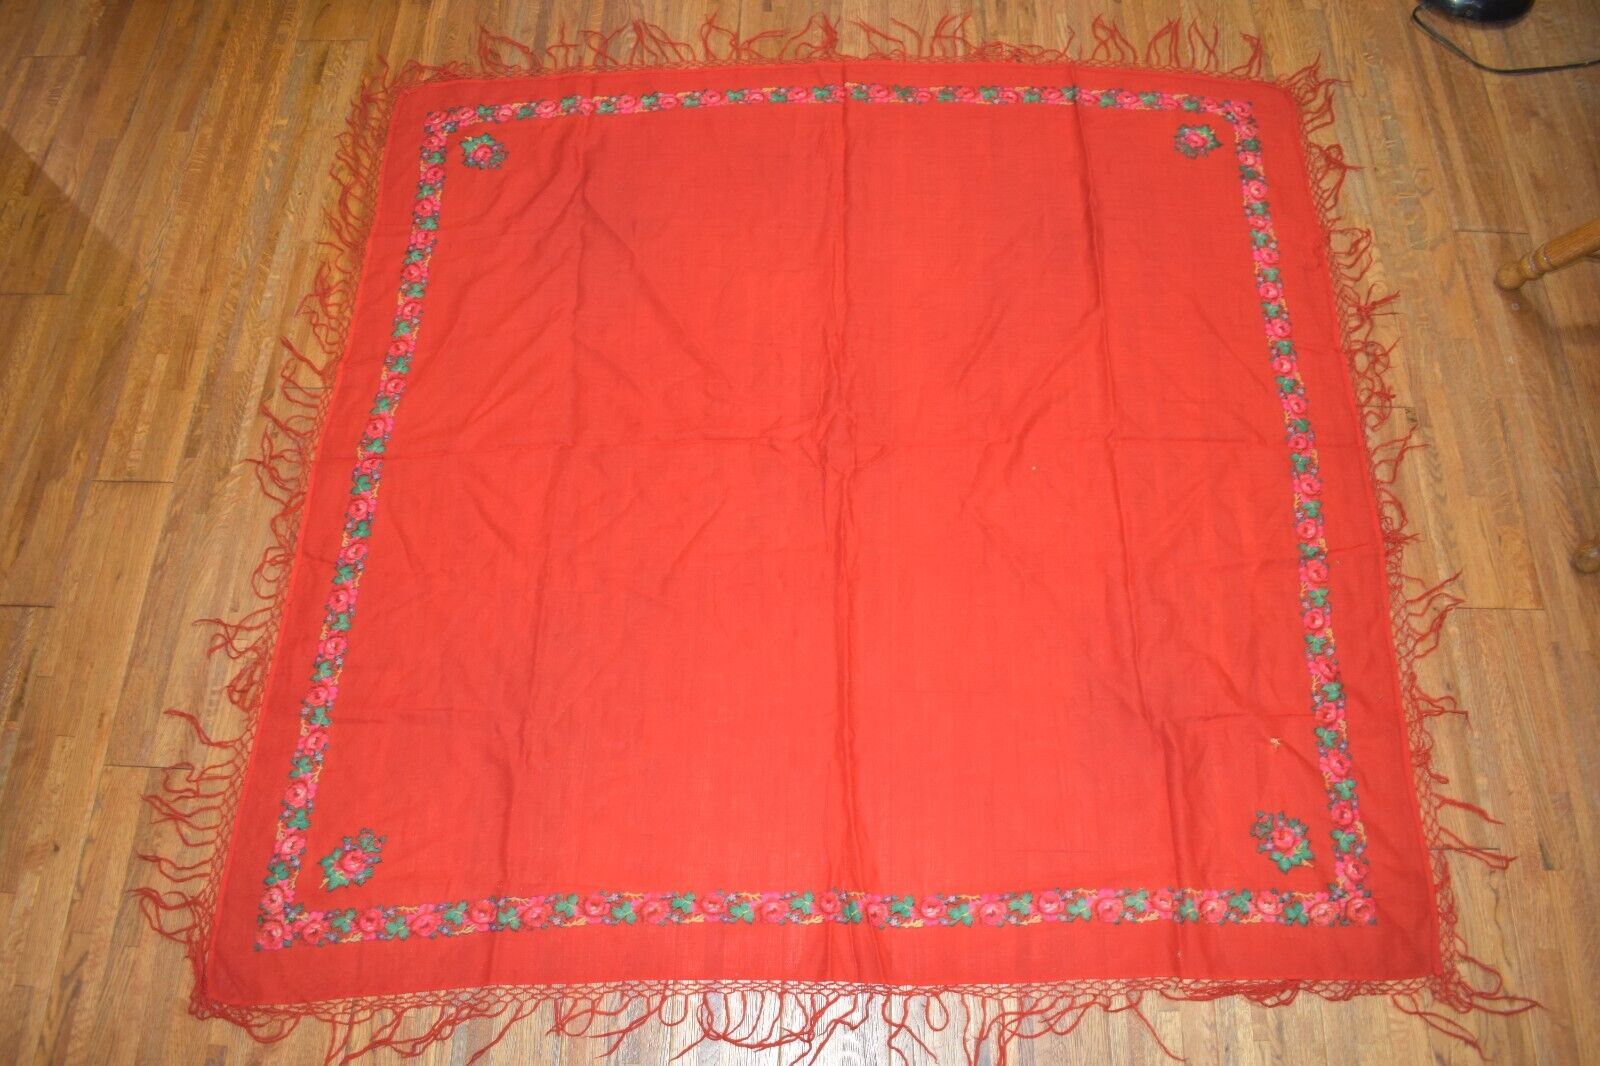 SQUARE LINEN 54X55 TABLECLOTH w/ FLOWERS MCM VINTAGE BRIGHT RED FRINGE